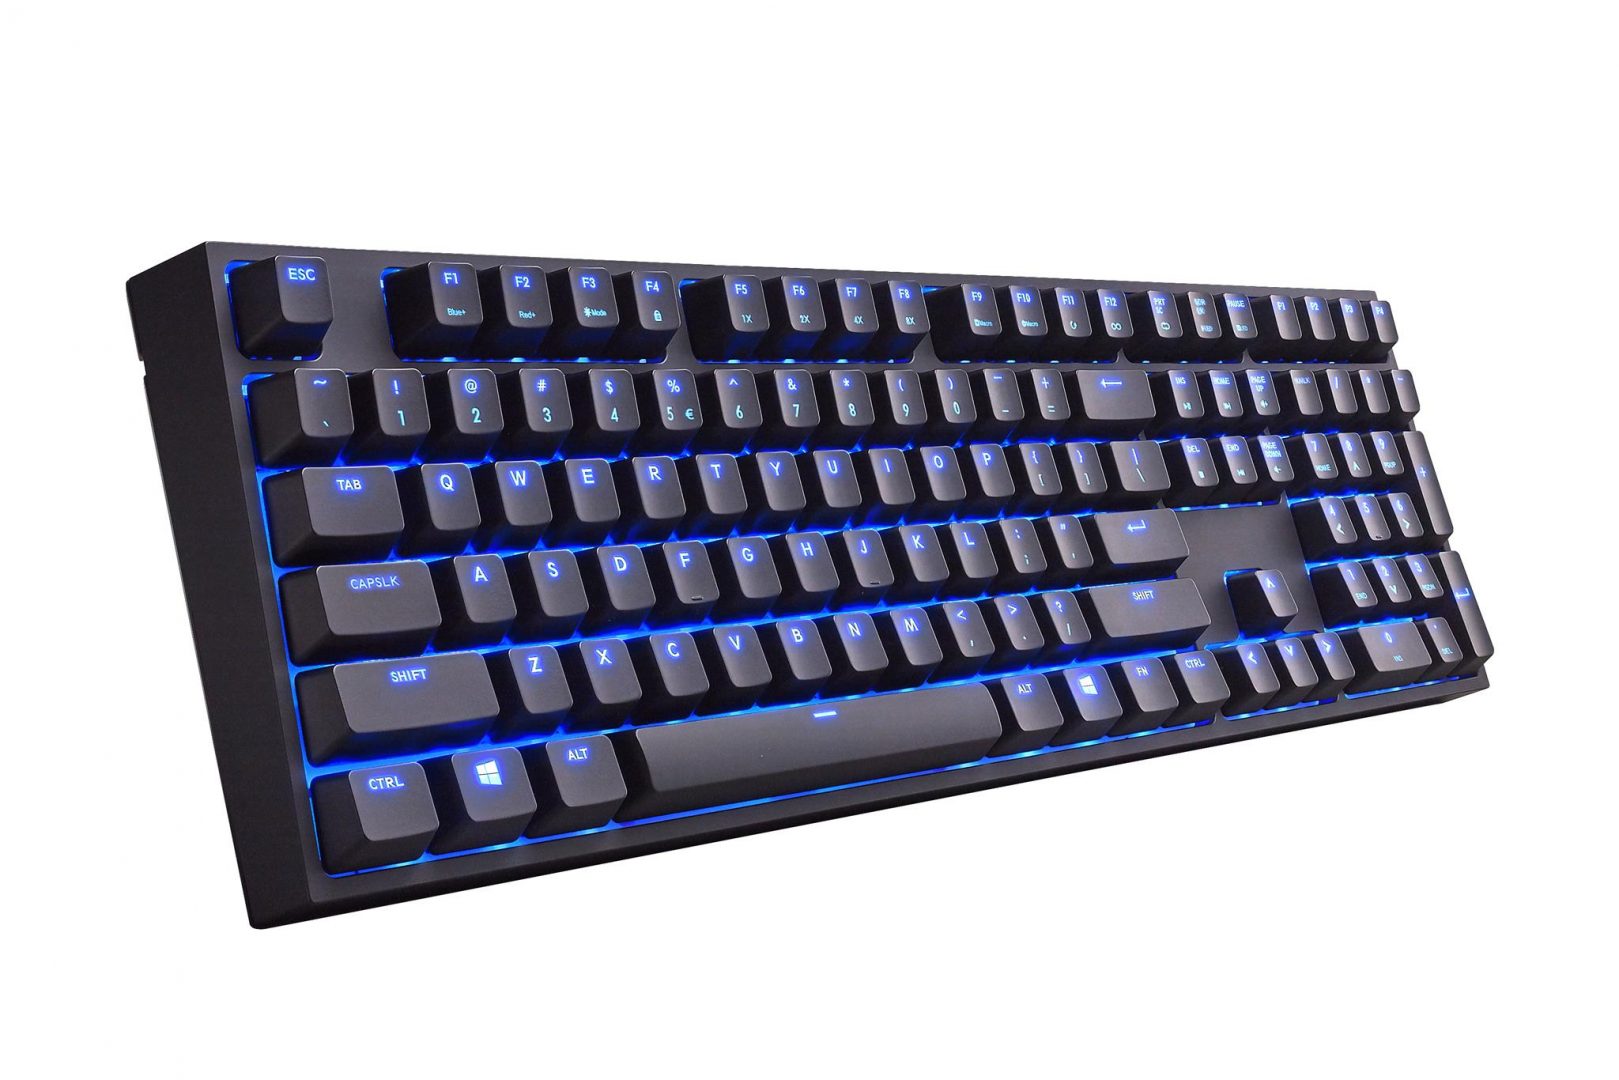 Cooler Master Quickfire XTI Mechnical Gaming Keyboard2